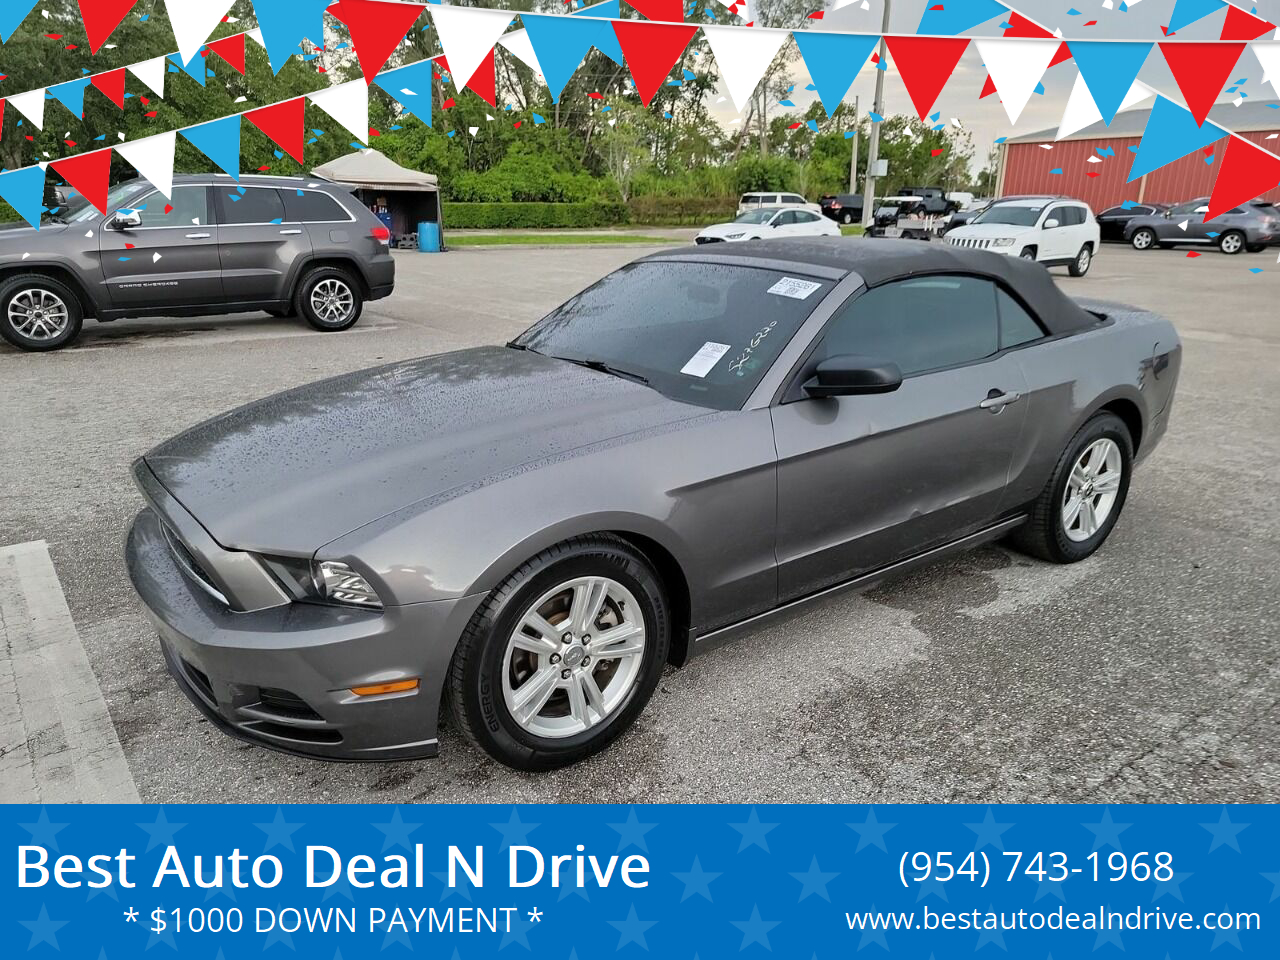 2014 FORD Mustang Convertible - $6,495